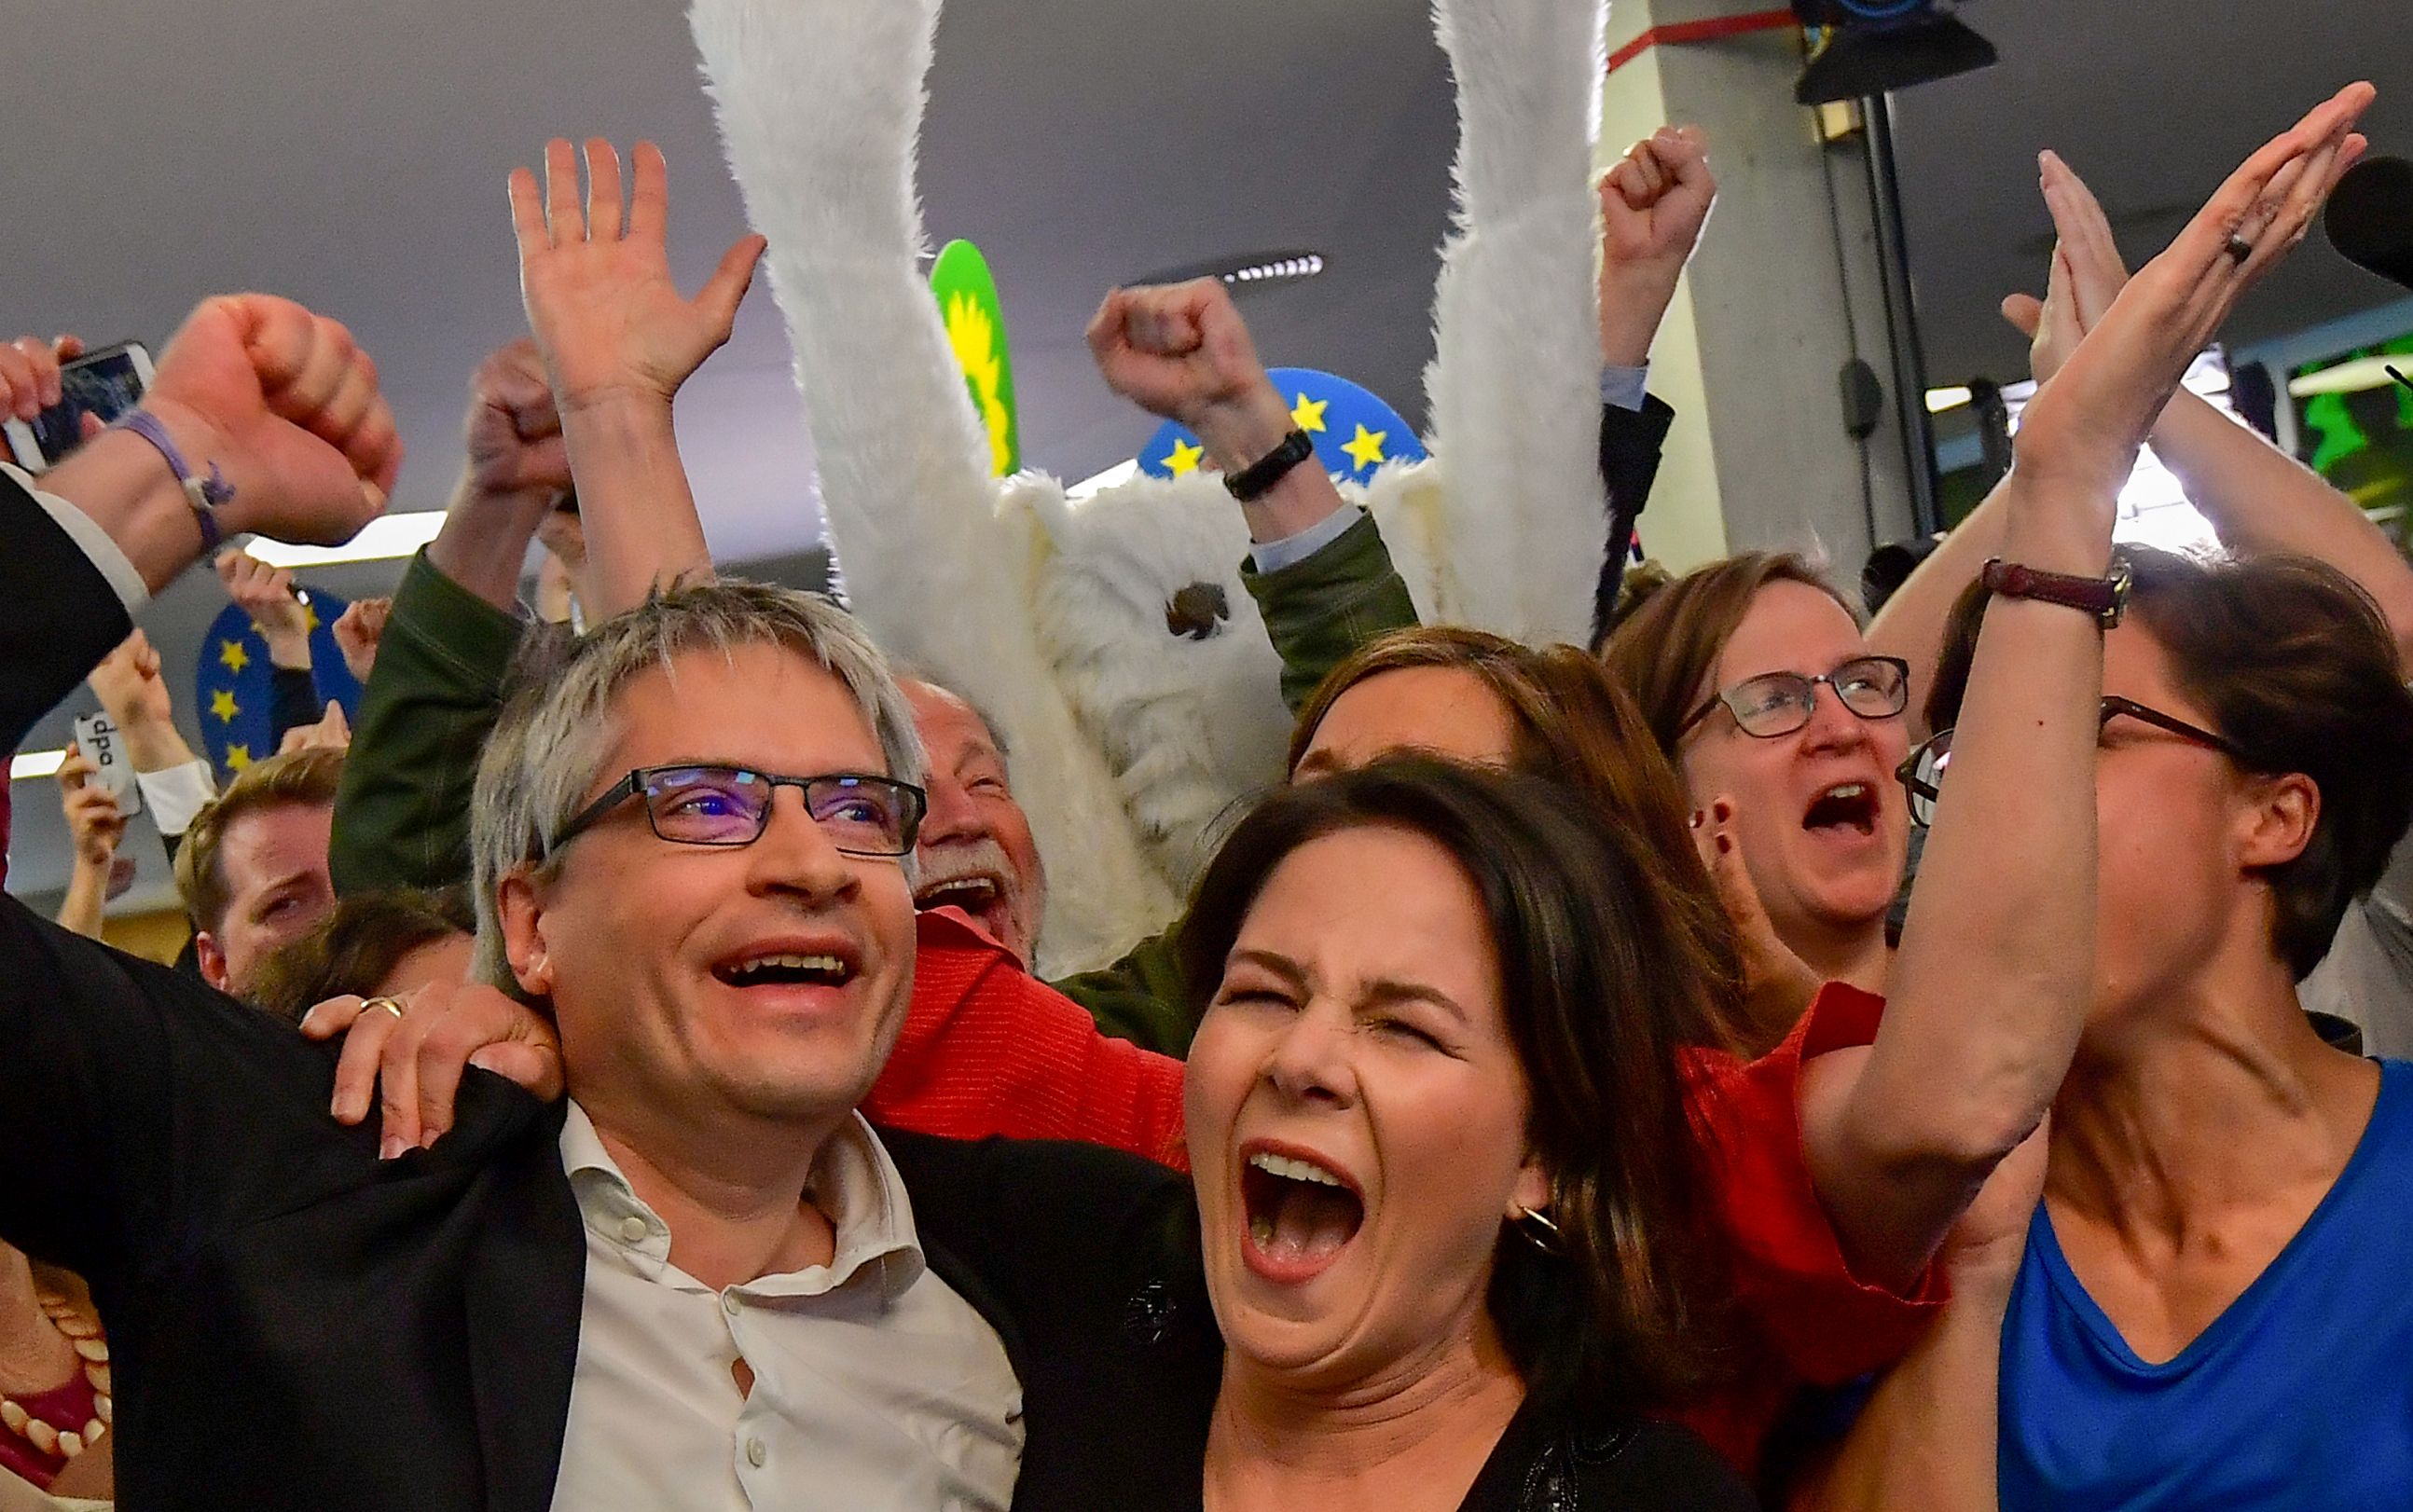 German Greens party top candidate Sven Giegold (L) and co-leader of the Green party Annalena Baerbock (C) celebrate as exit poll are announced on public broadcast TV stationsin Berlin.